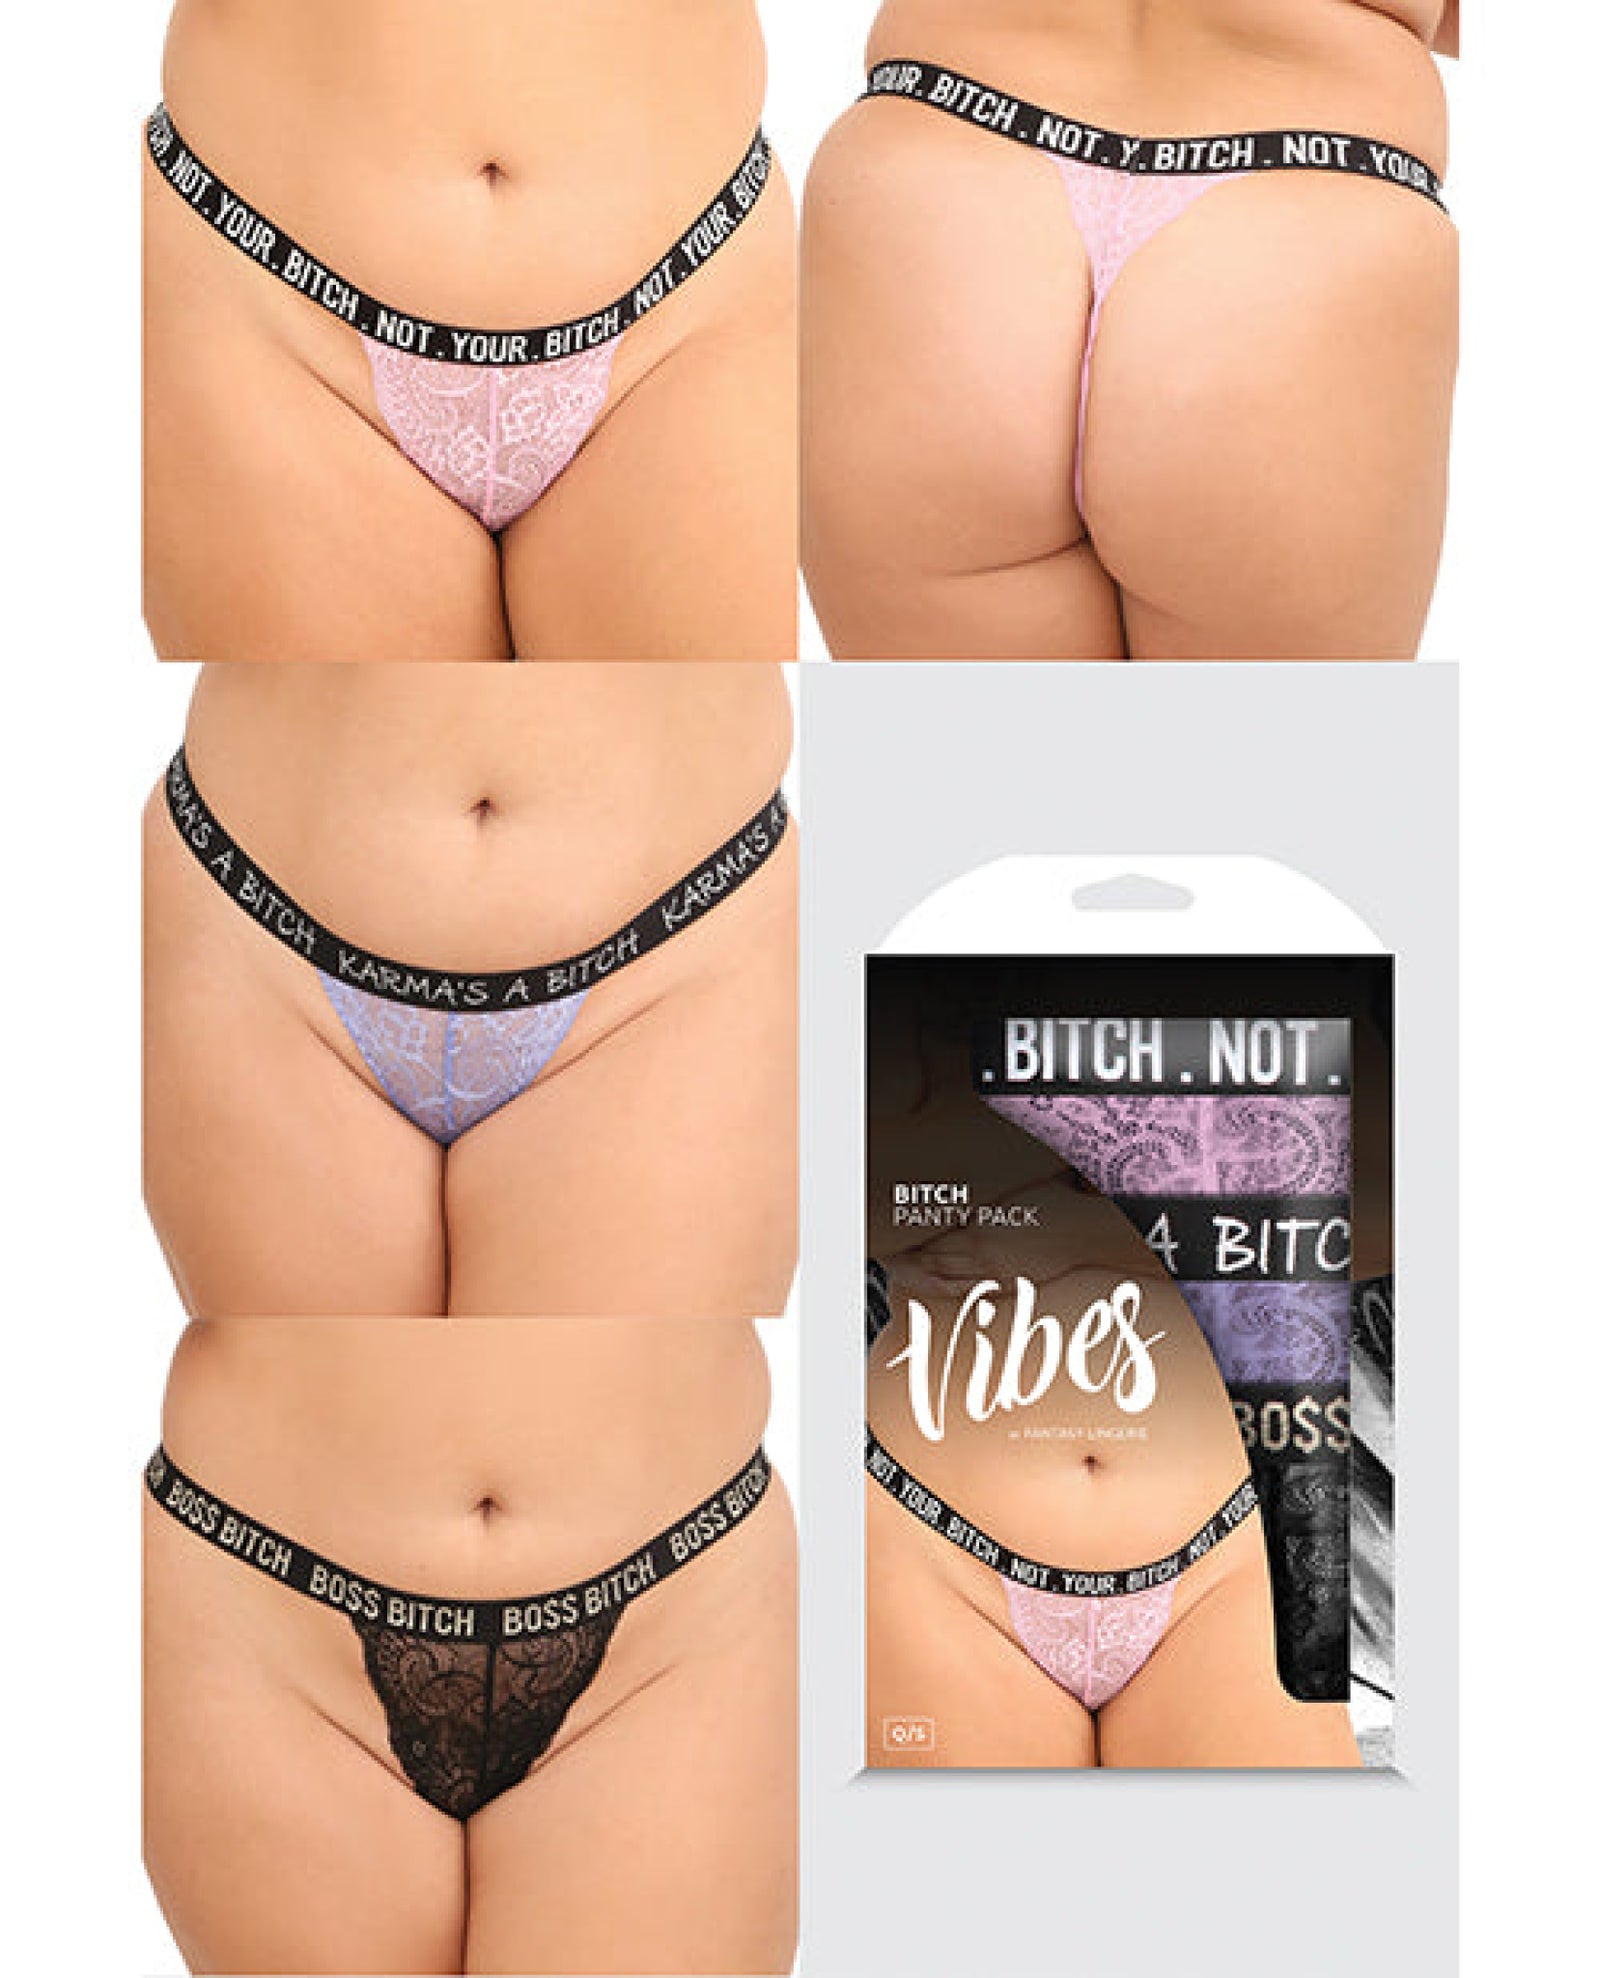 Vibes Bitch 3 Pack Lace Panty Assorted Colors Qn Fantasy Lingerie